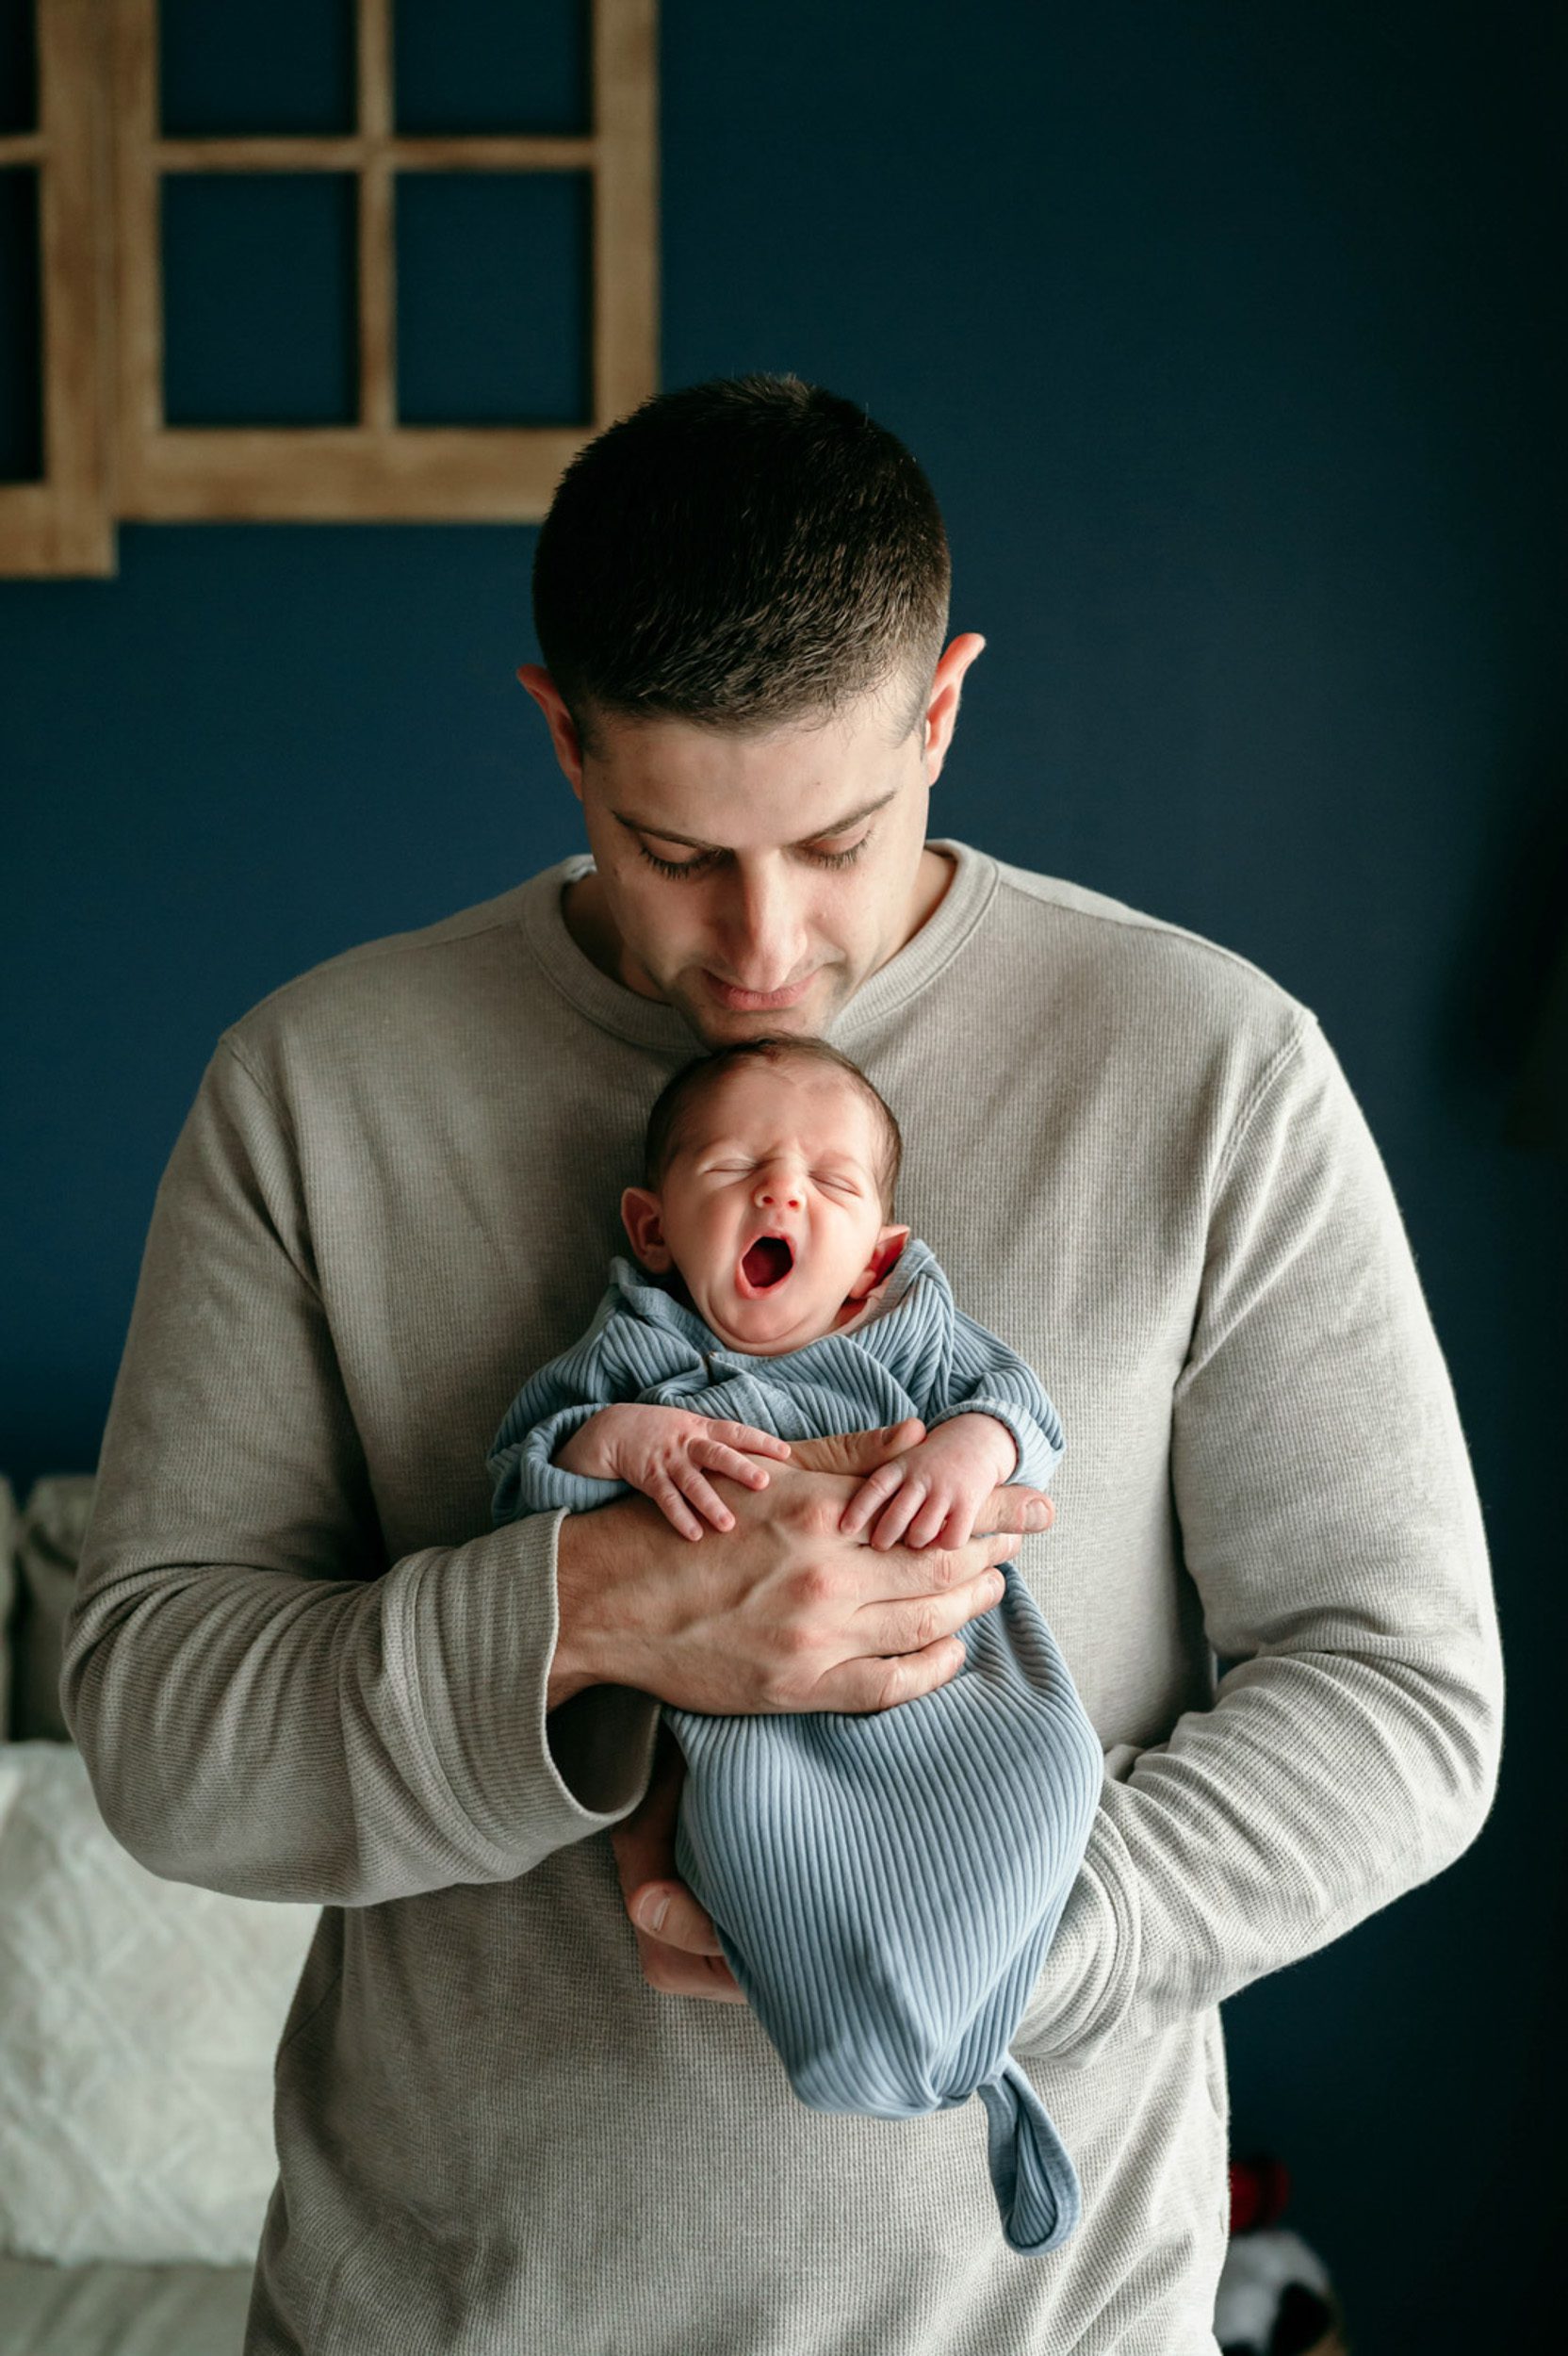 Newborn photo of a baby boy yawning while his dad holds him against his chest during a natural newborn photo session